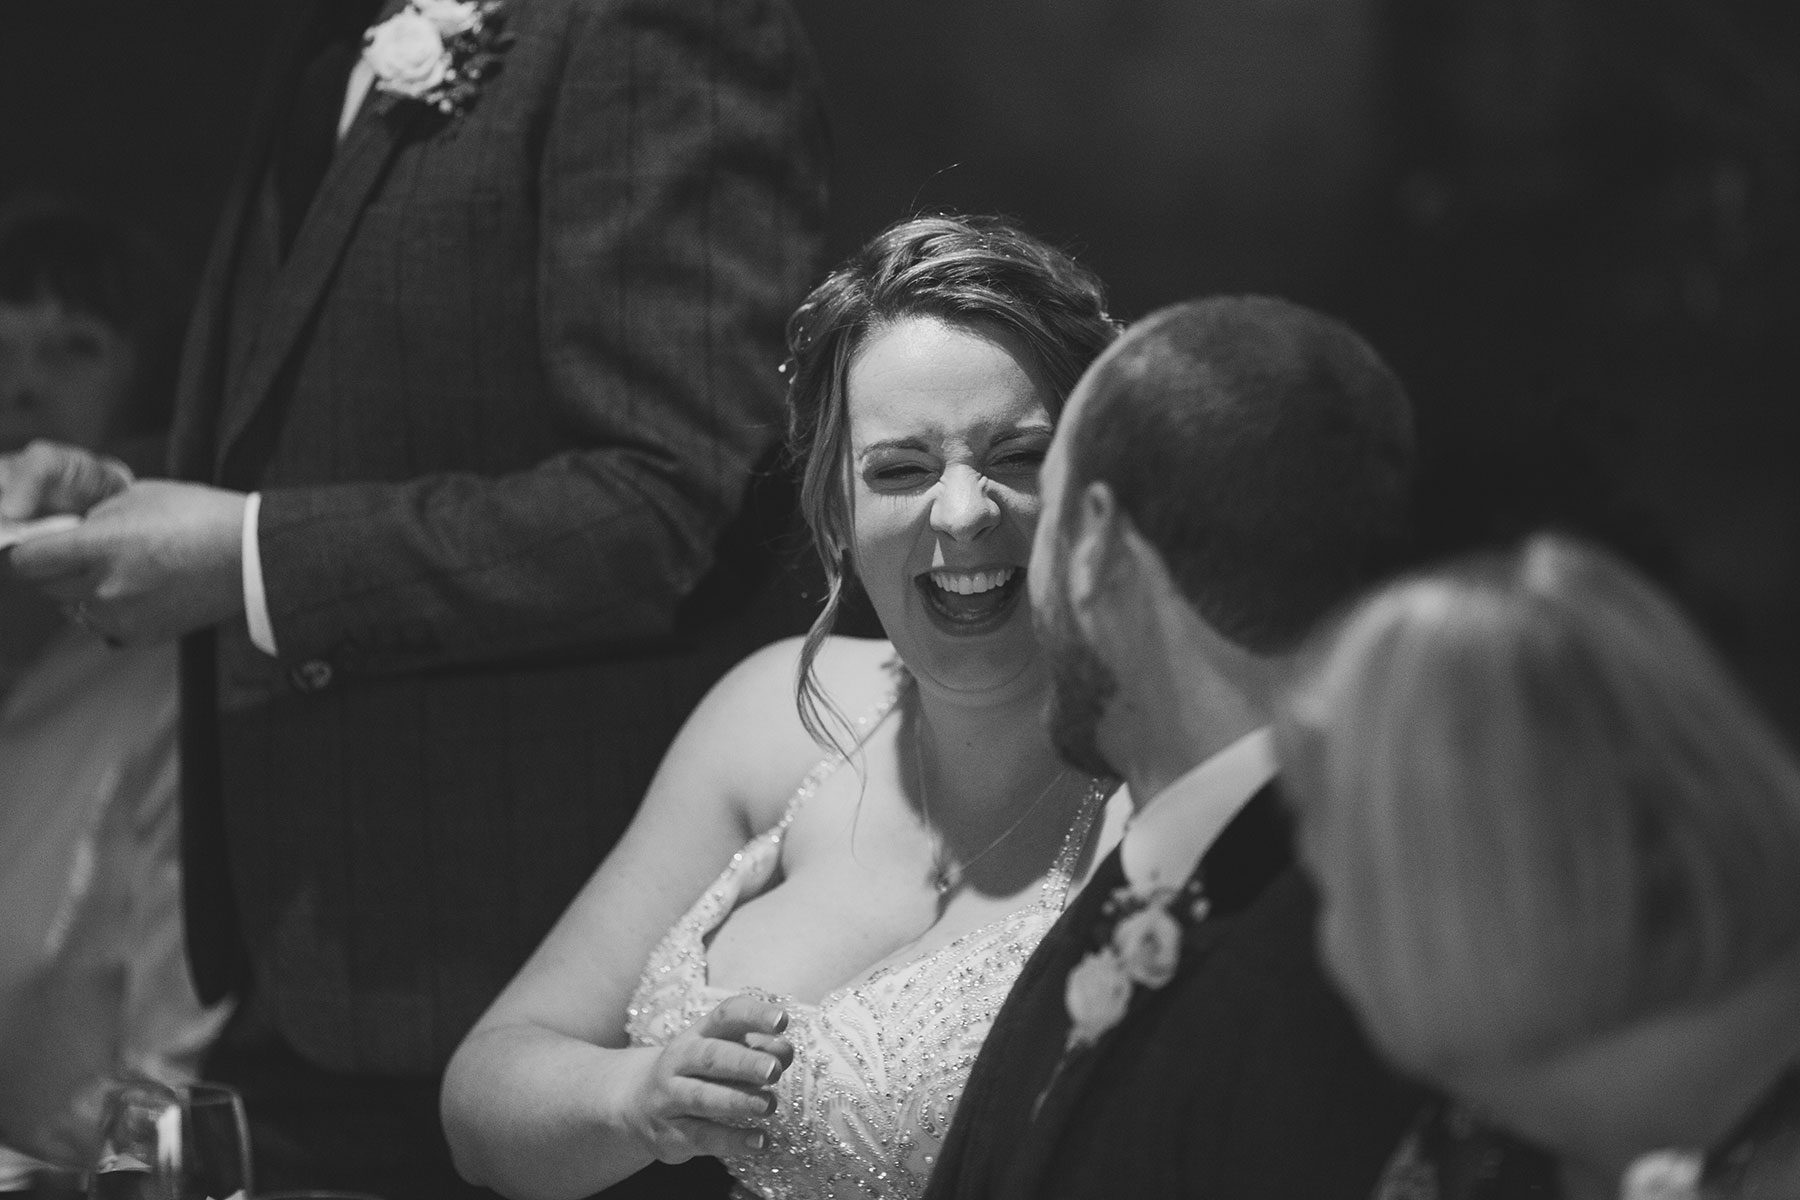 Wedding Photographer, Lains Barn, Photography in Cheltenham, the Cotswolds and the surrounding areas.